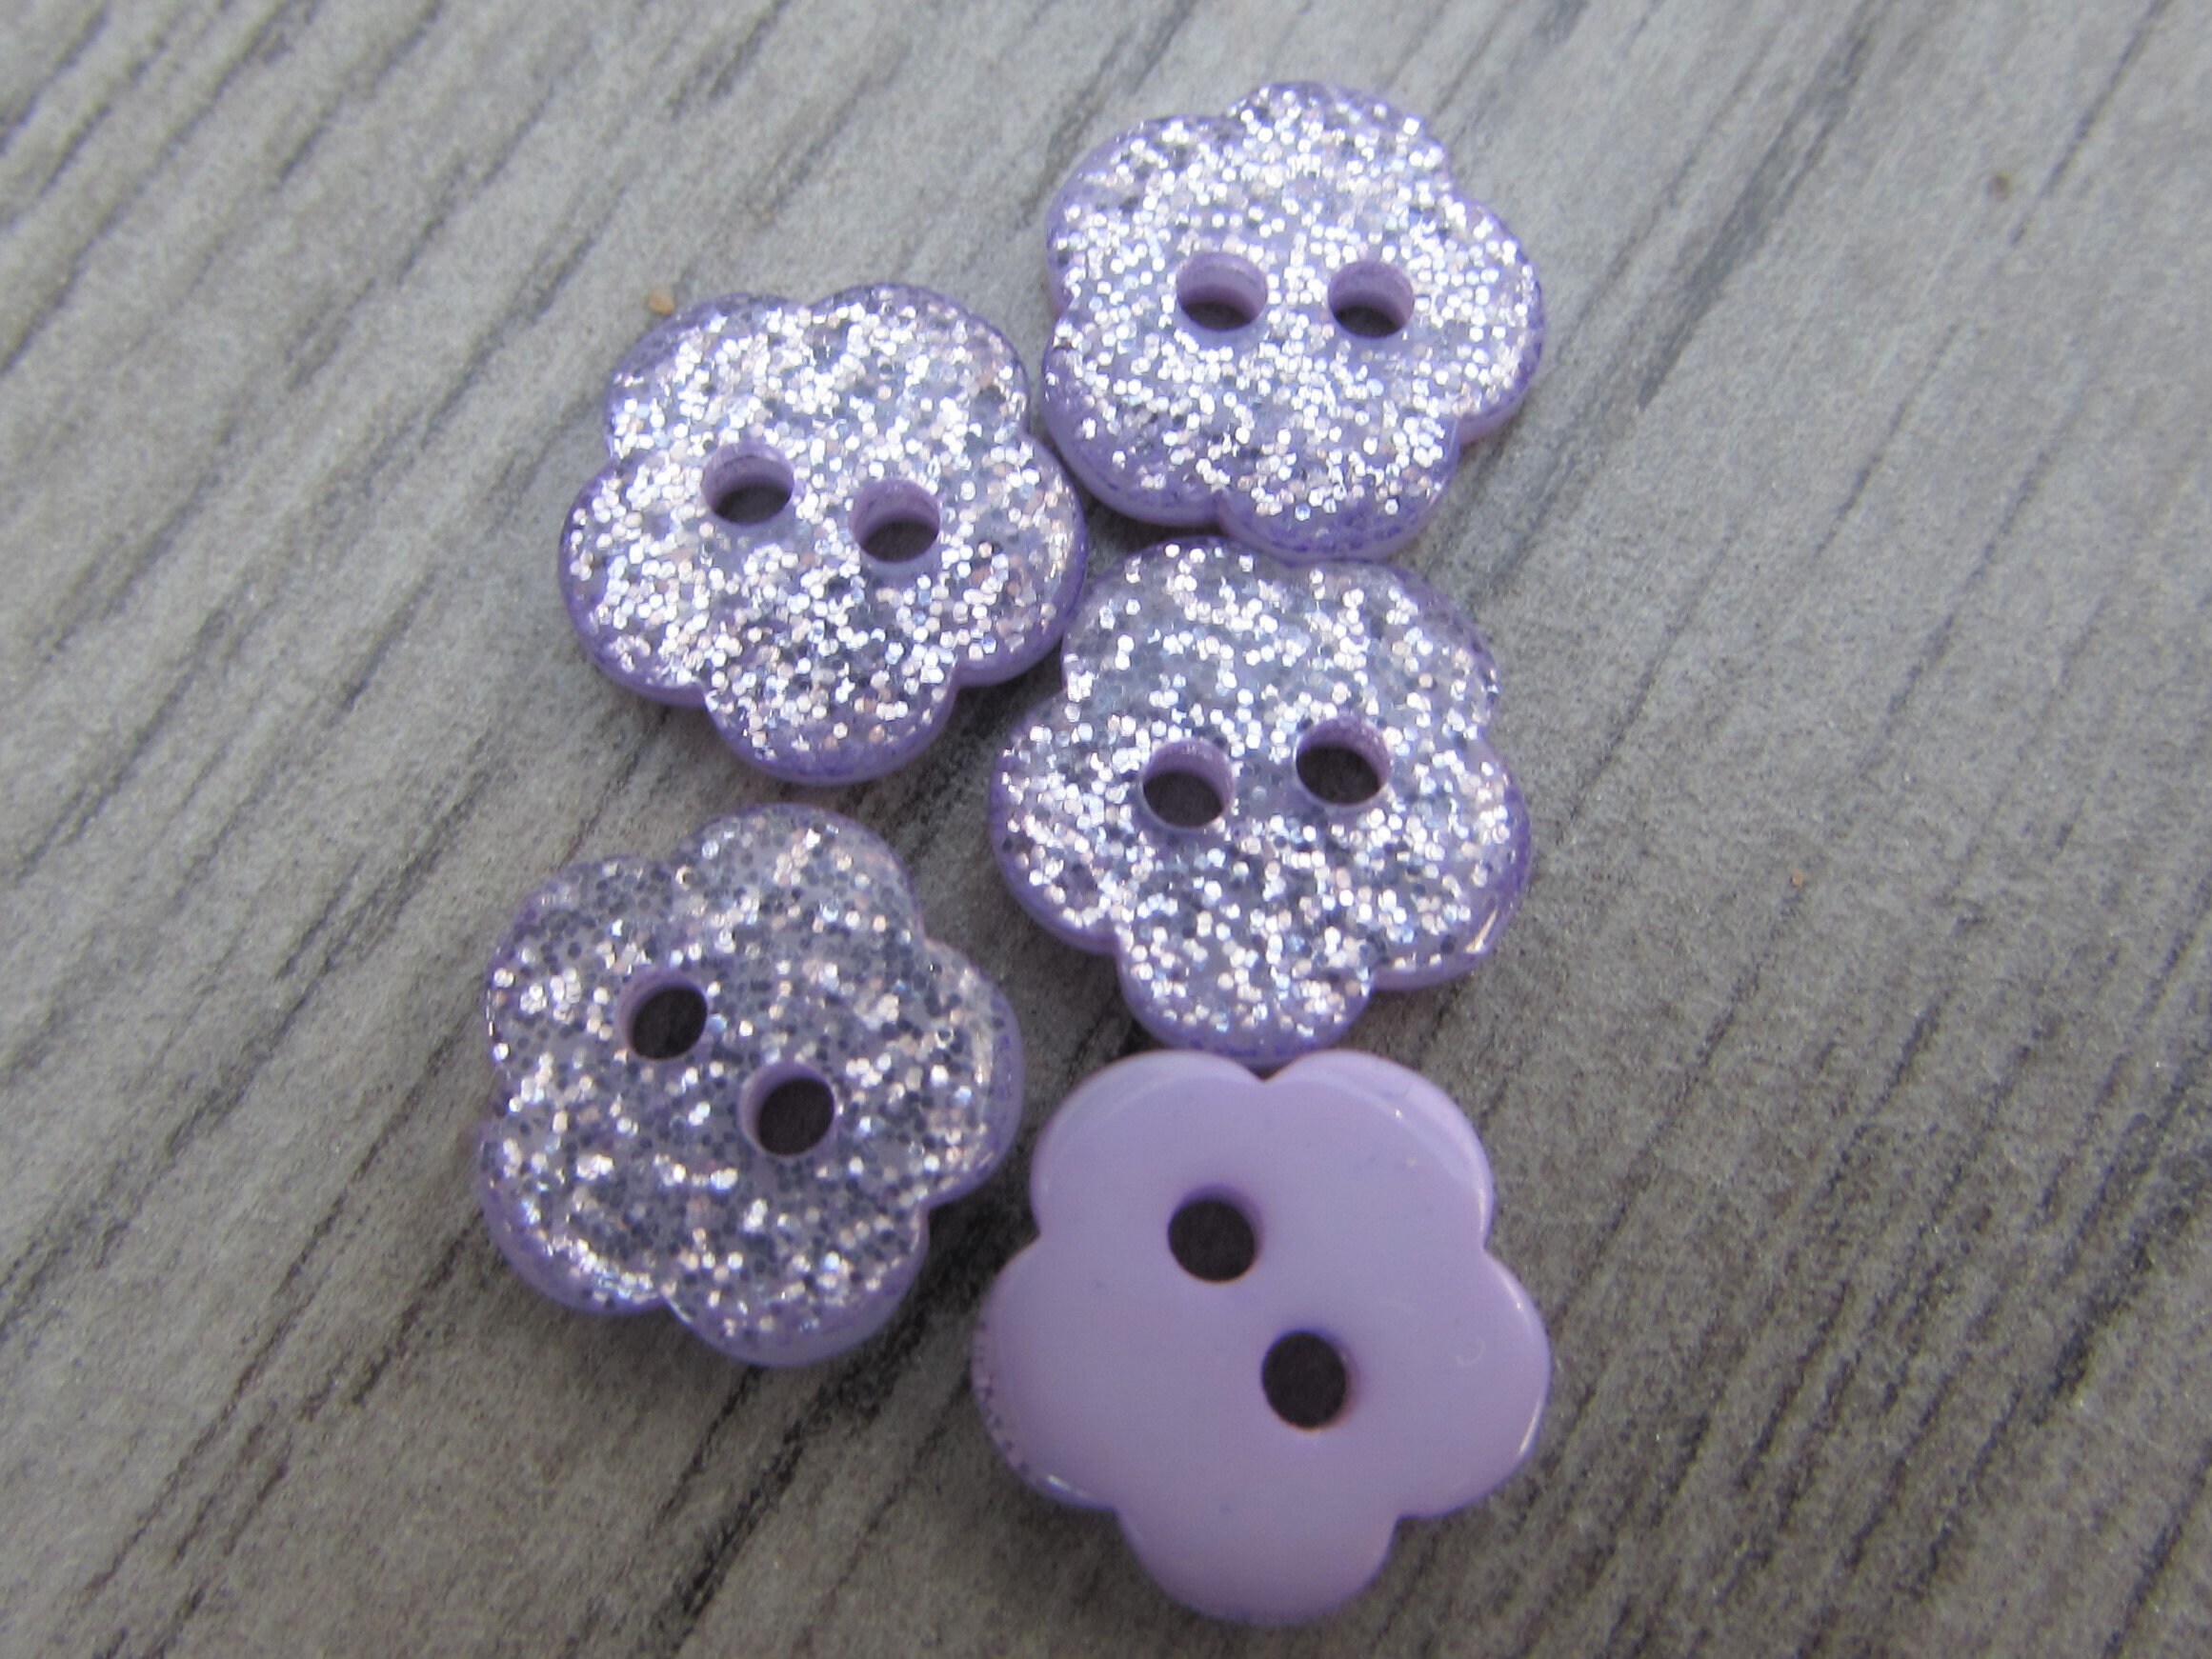 Small Buttons 10mm-15mm - Totally Buttons